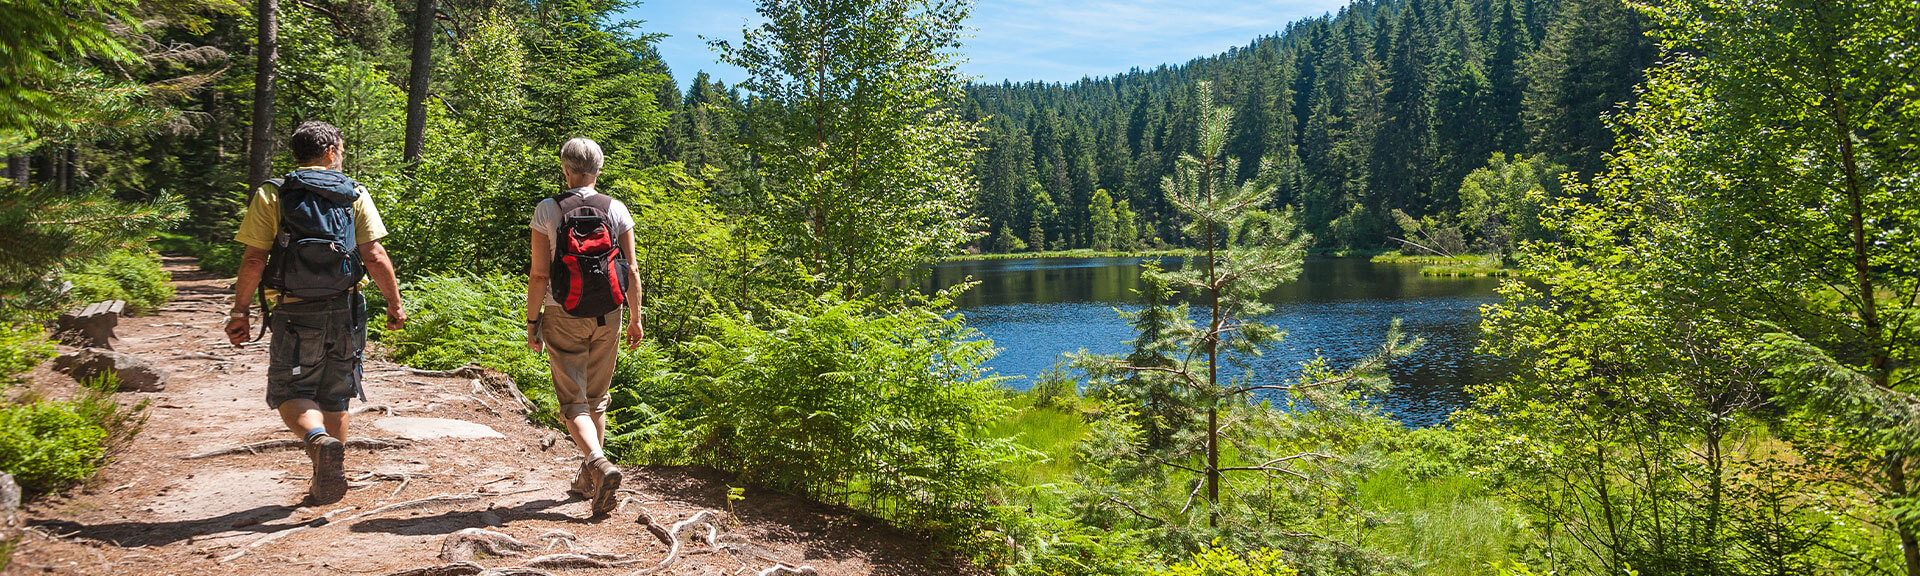 2 people hiking in black forest along a lake